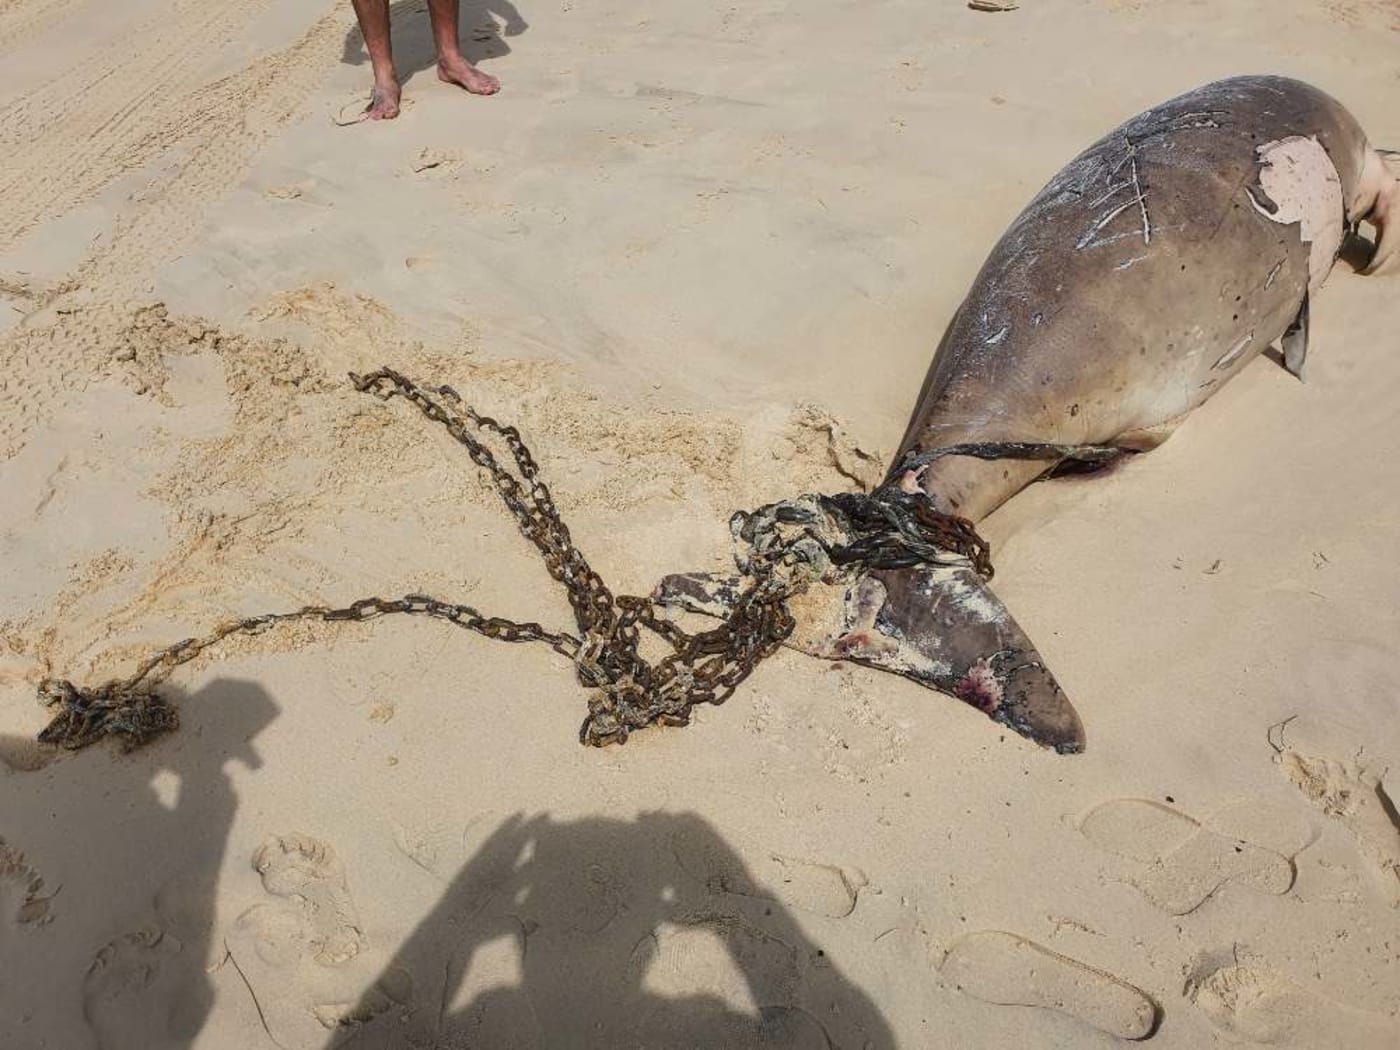 Dugong wrapped in a chain at Rainbow Beach